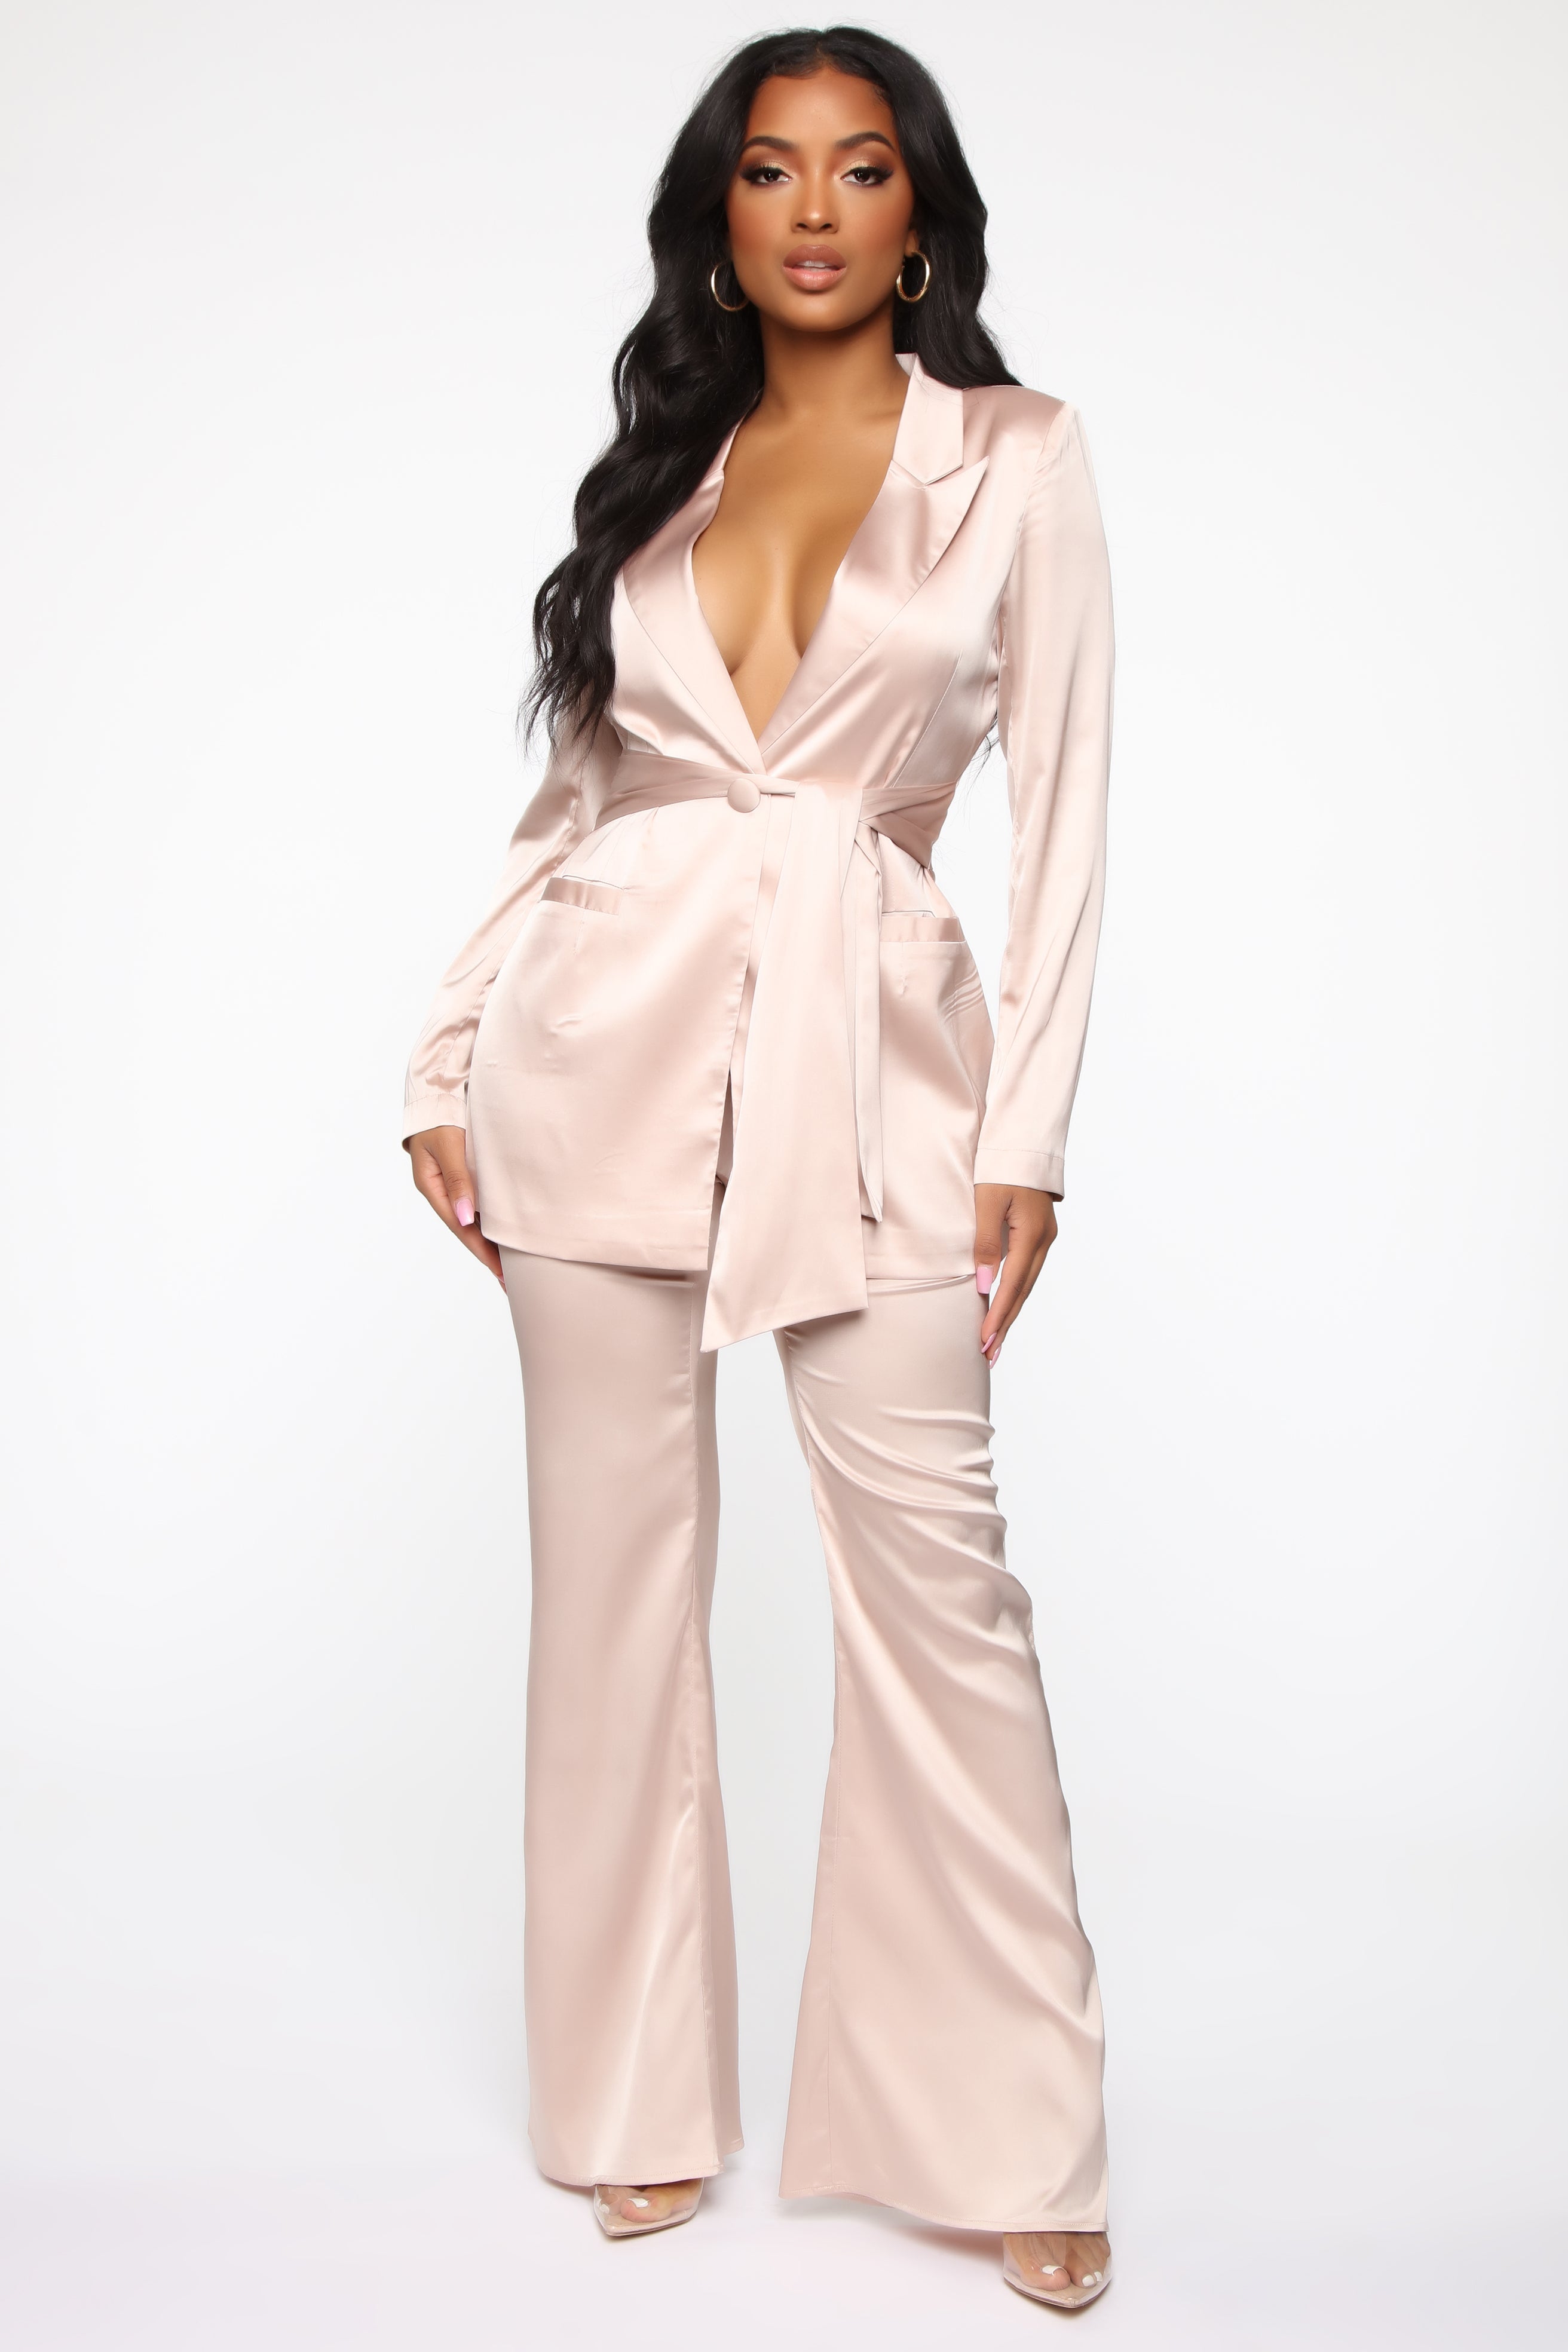 ASOS Premium Satin Double Breasted Suit Jacket in Natural | Lyst